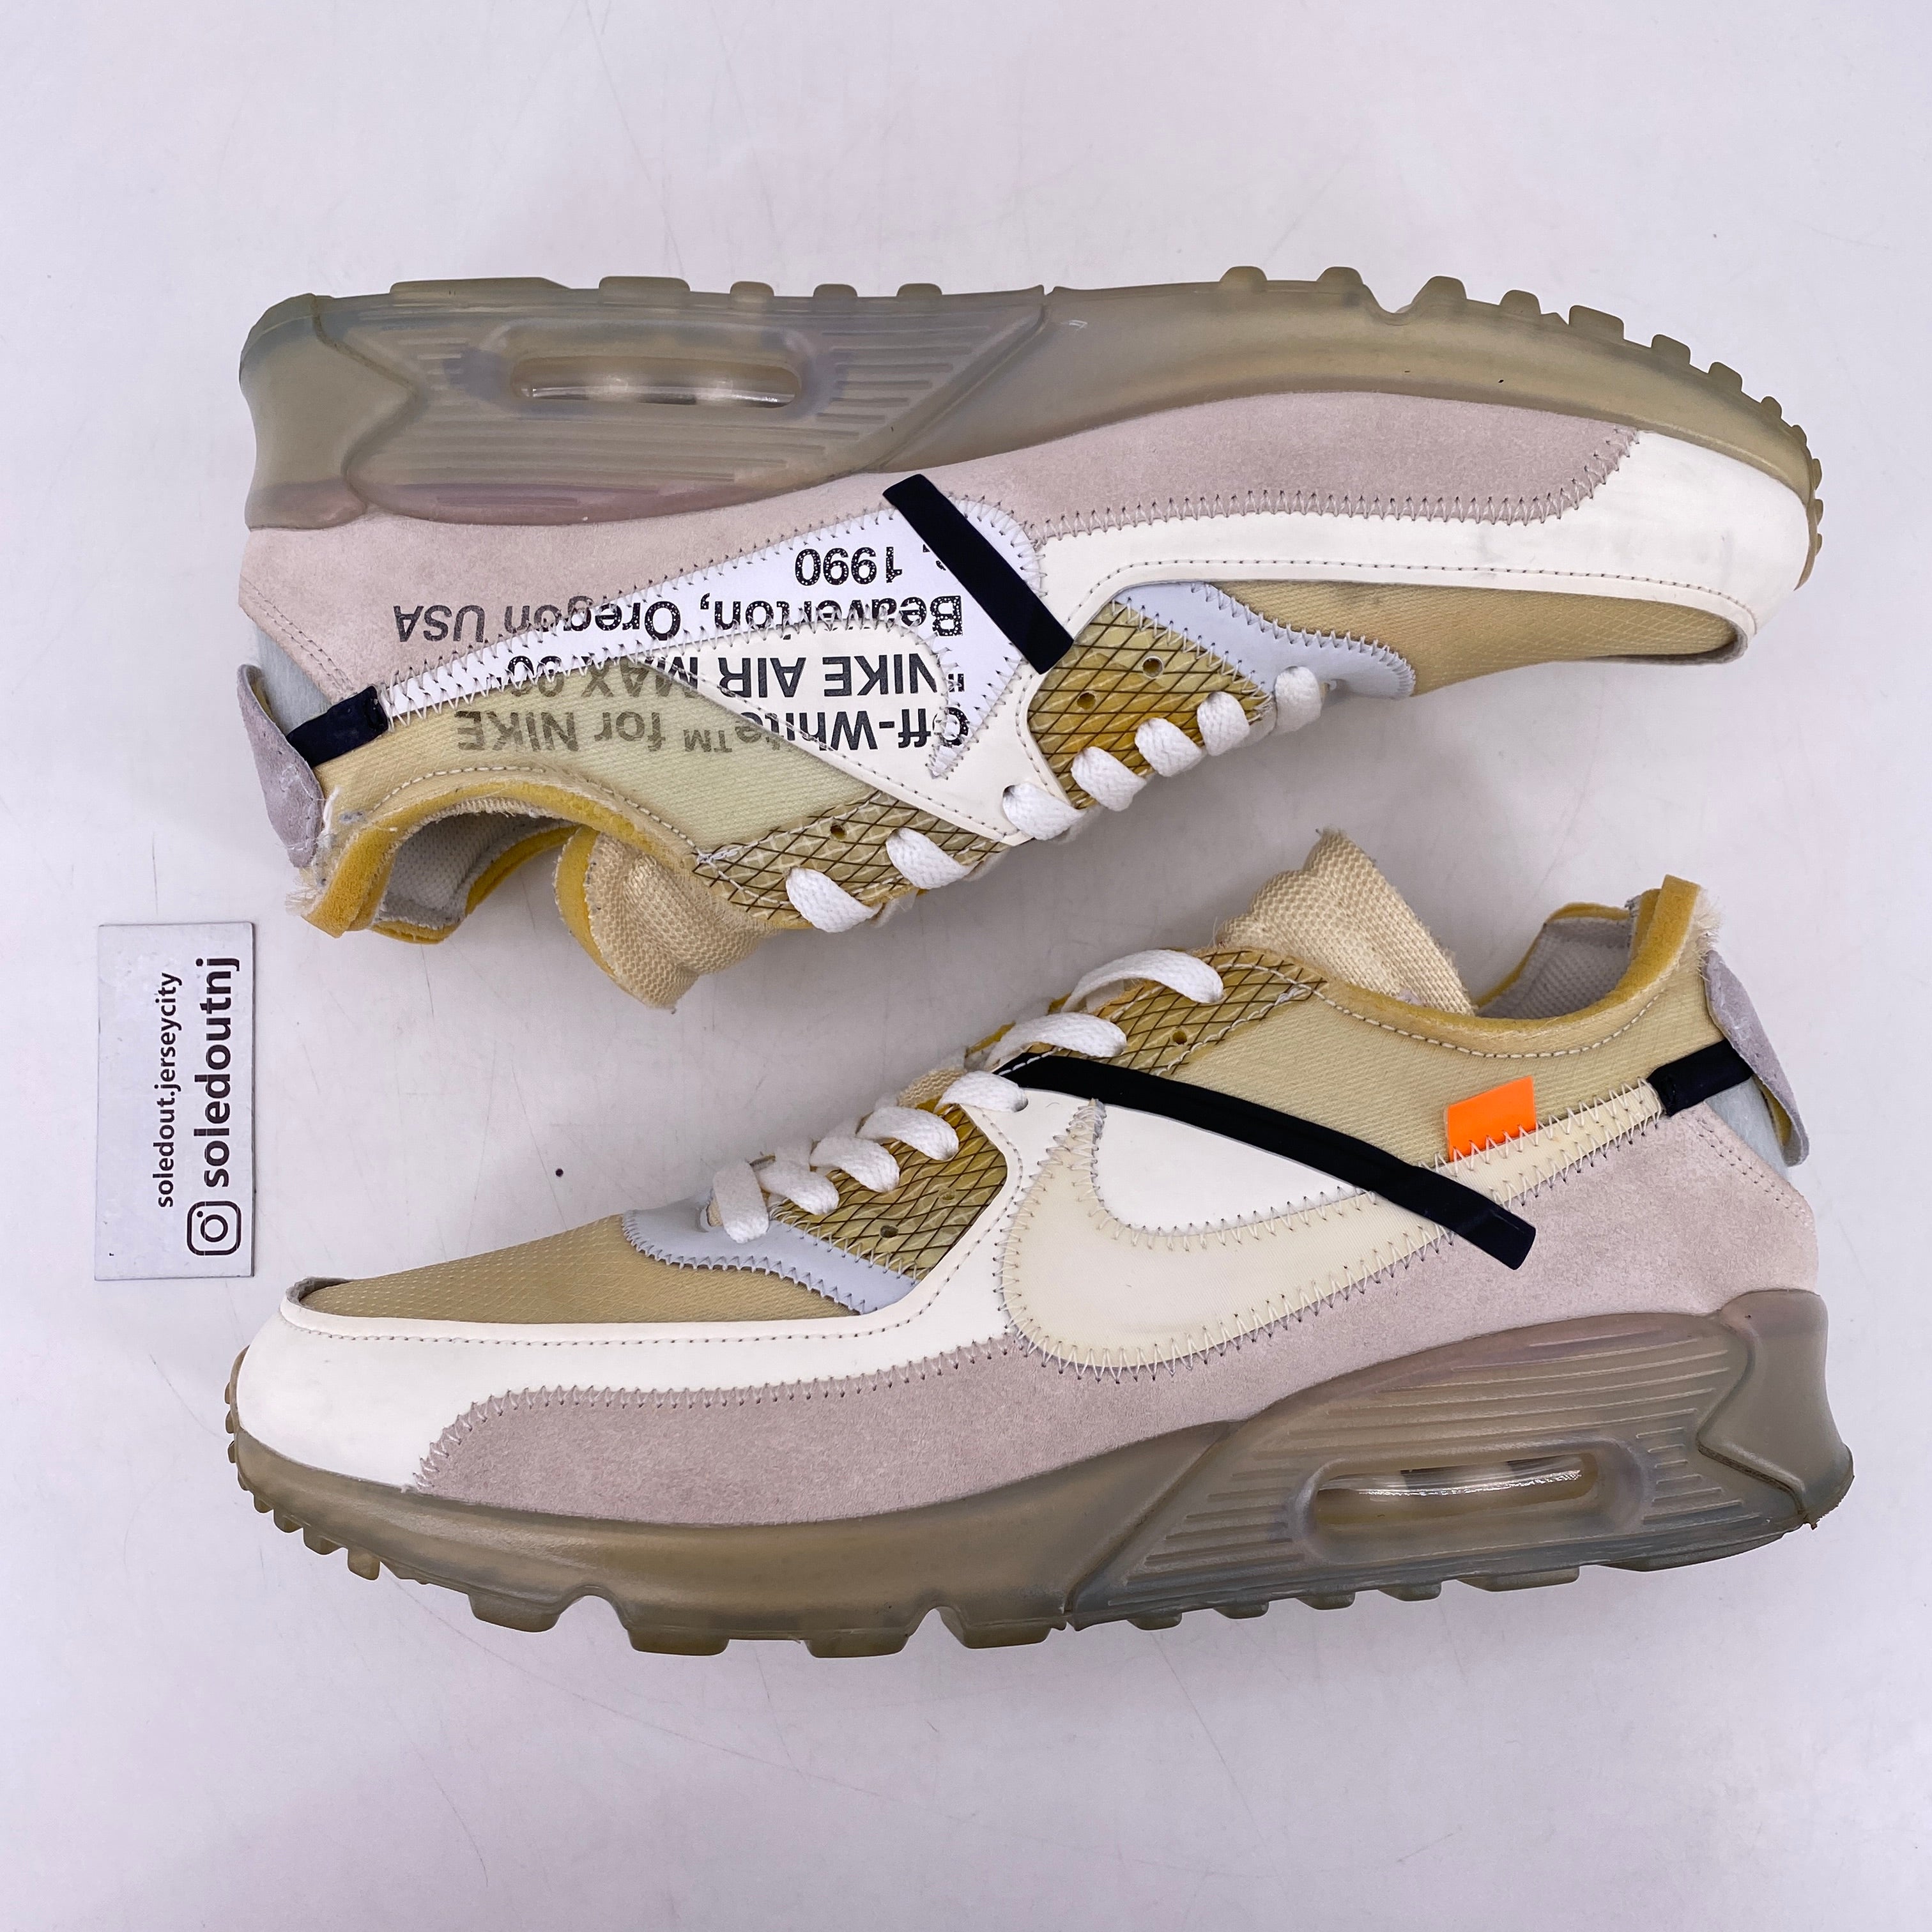 Nike Air Max 90 THE 10: OFF-WHITE 2017 Used Size 10 – Prodibio Shops